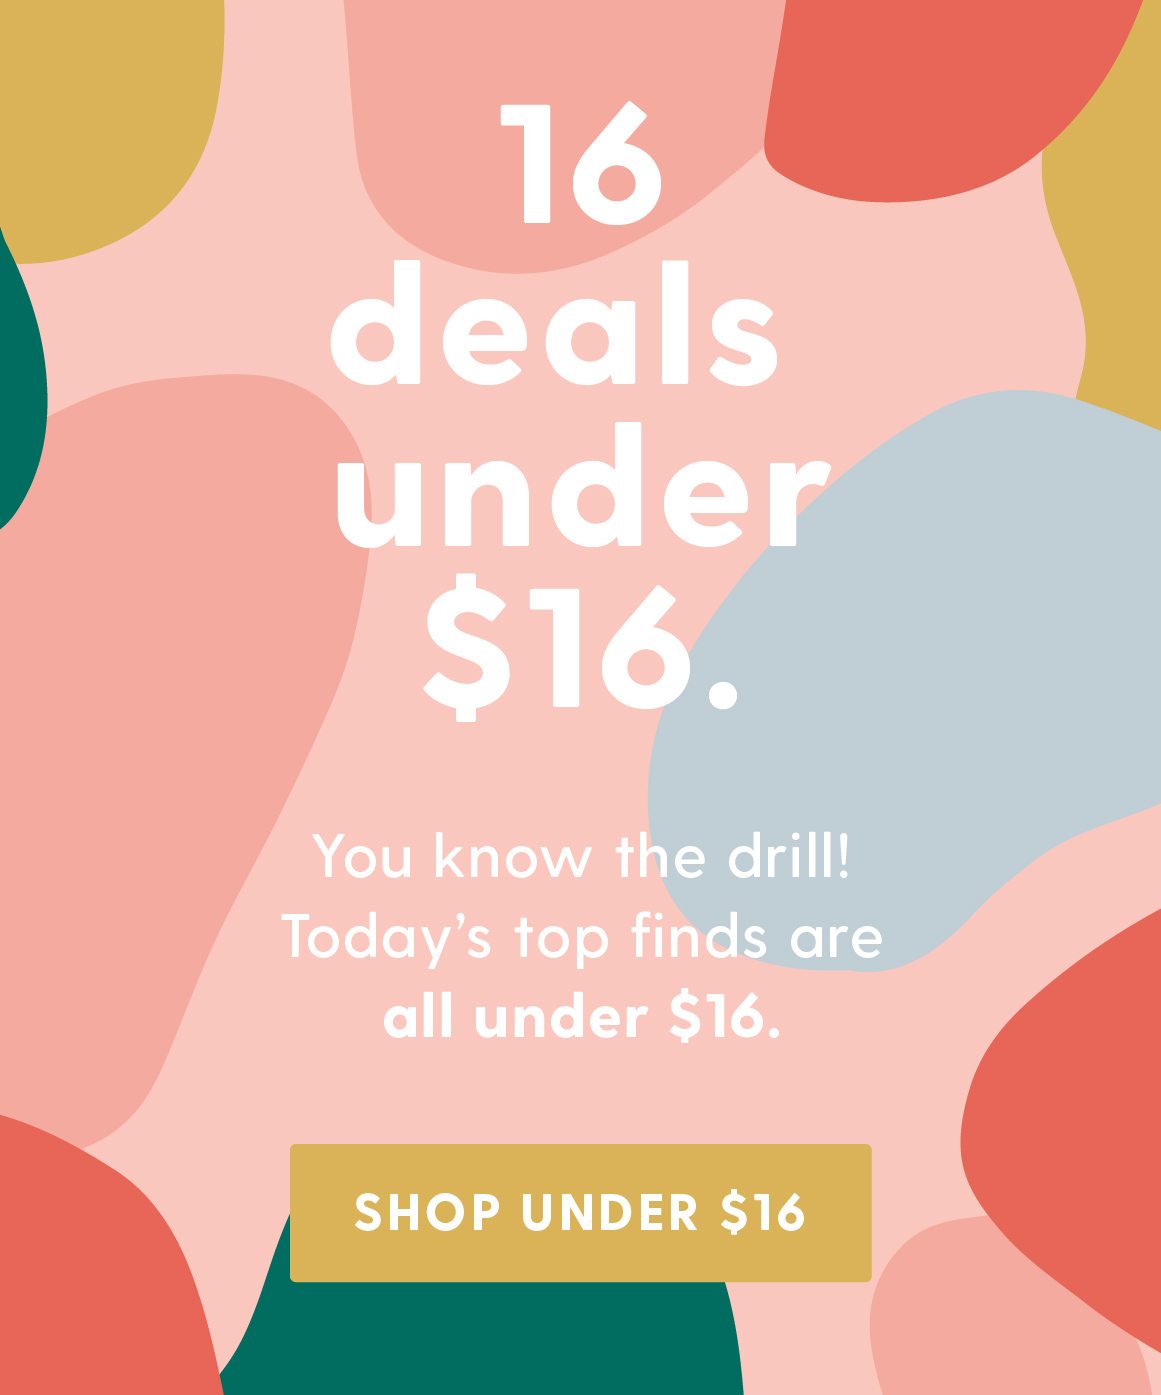 16 deals under $16. You know the drill! Today's top finds are all under $16. Shop Under $16.